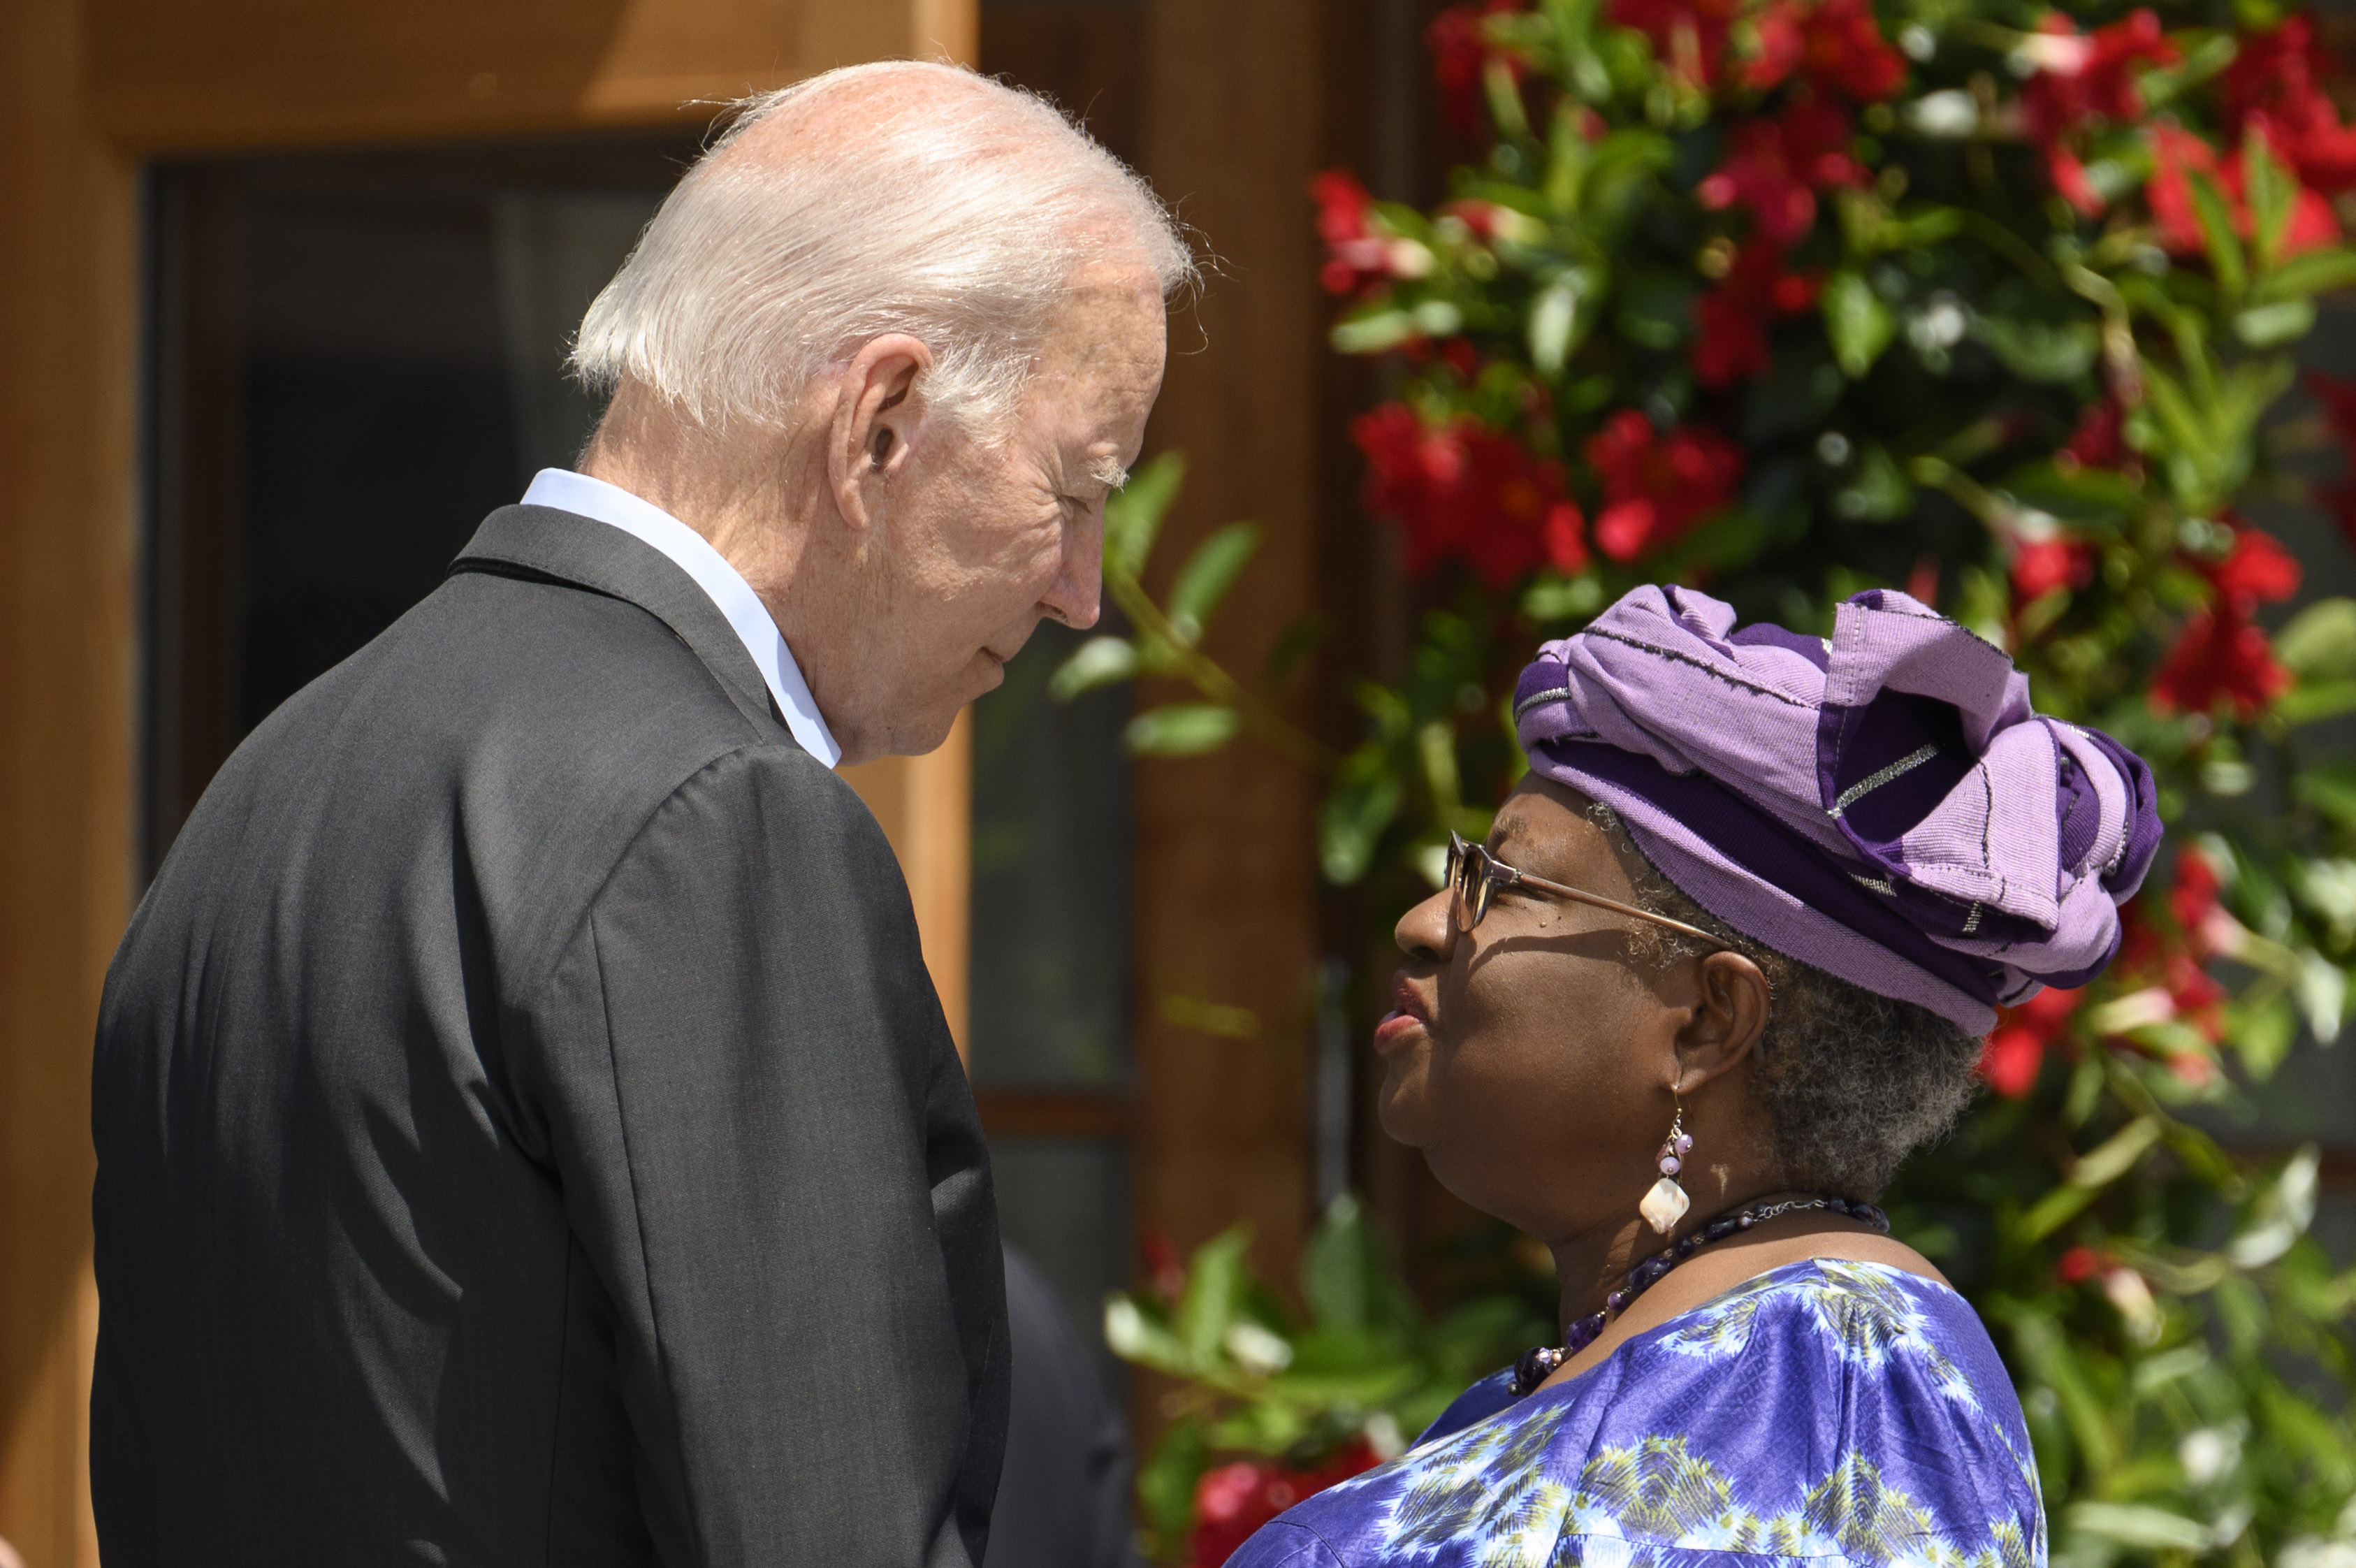 Director-General of the World Trade Organization Ngozi Okonjo-Iweala speaking with US President Joe Biden at the official welcome of the G7 outreach partners.